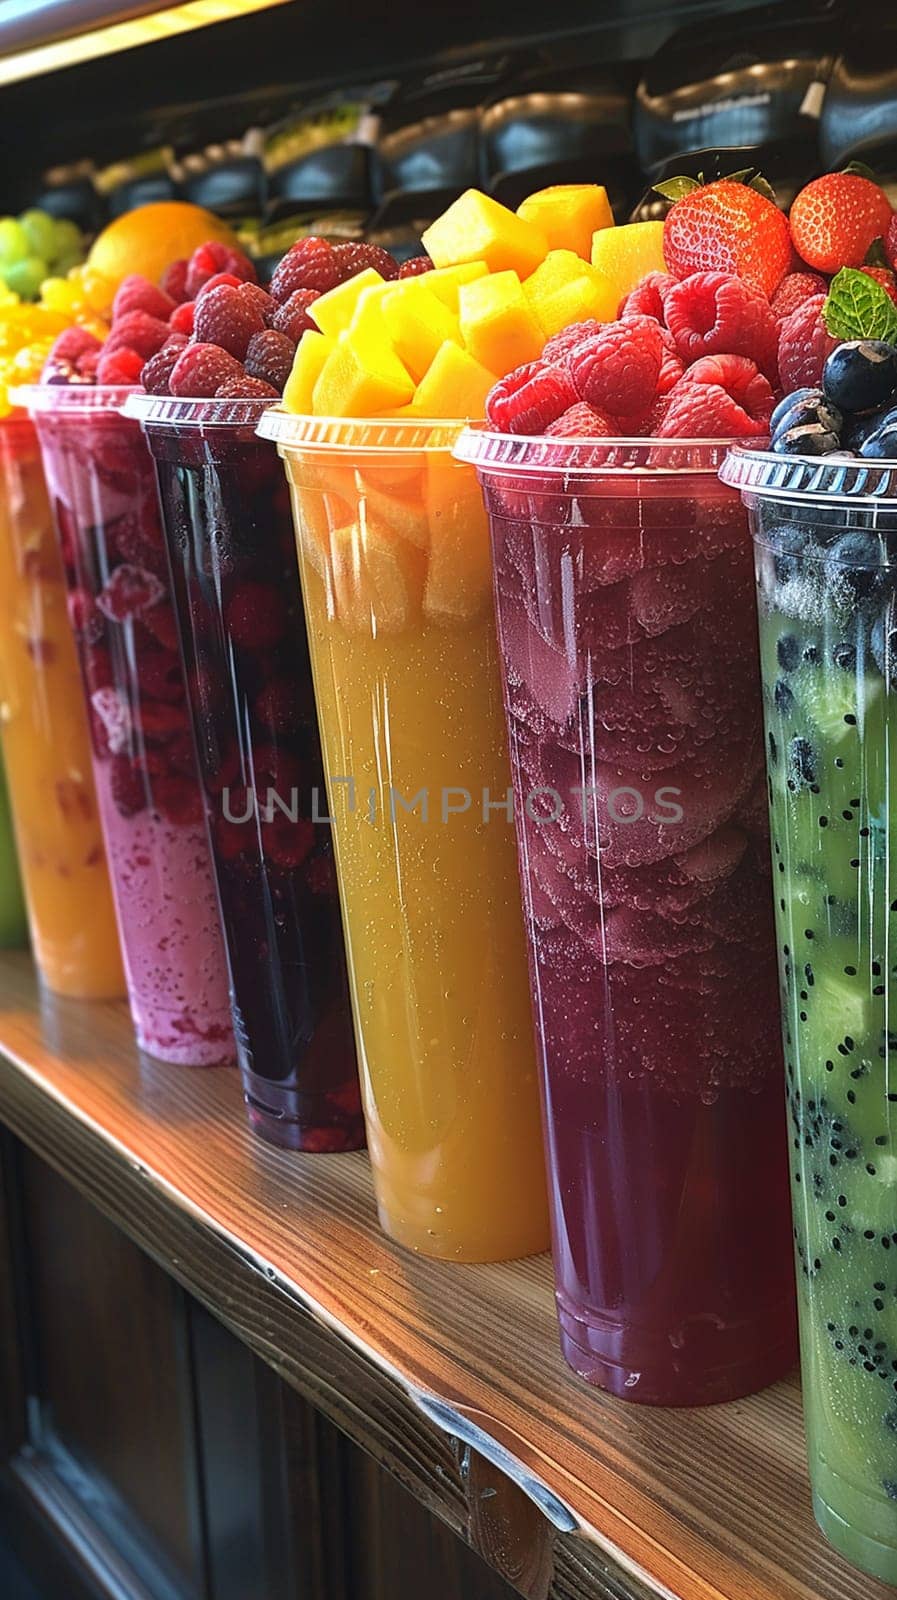 Vibrant Smoothie Kiosk Blends Health with Taste in Business of Refreshing Beverages, Blended fruits and colorful smoothies blend a story of health with taste and refreshing beverages in the vibrant smoothie kiosk business.